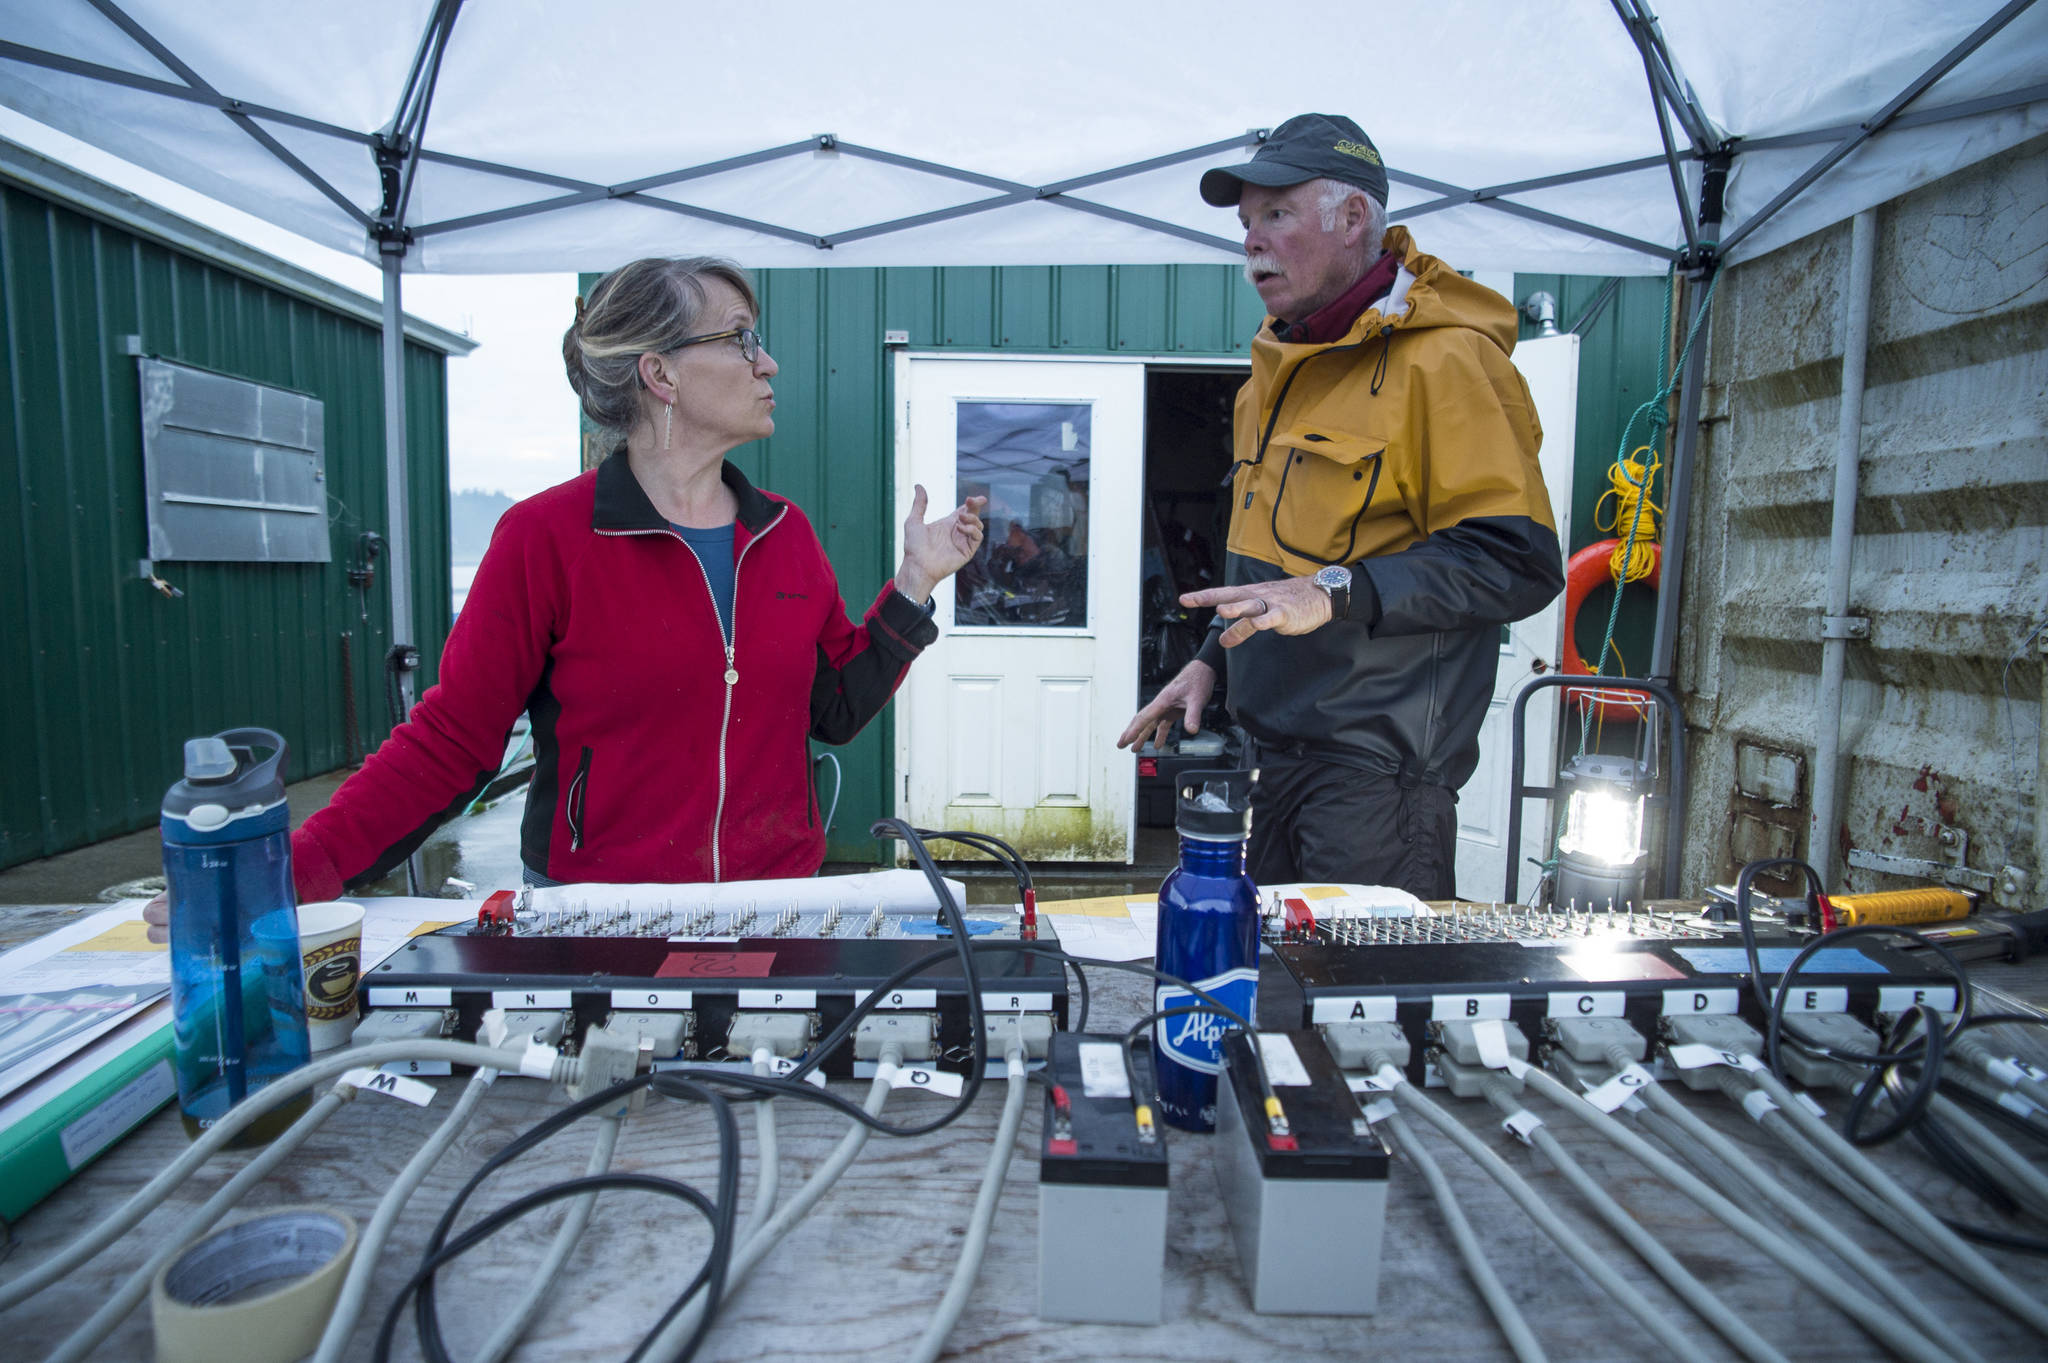 Volunteers Sigrid Dahlberg, left, and Gary Stambaugh work to set up the annual city-funded fireworks show in Juneau’s downtown harbor on Tuesday, July 3, 2017. (Michael Penn | Juneau Empire)